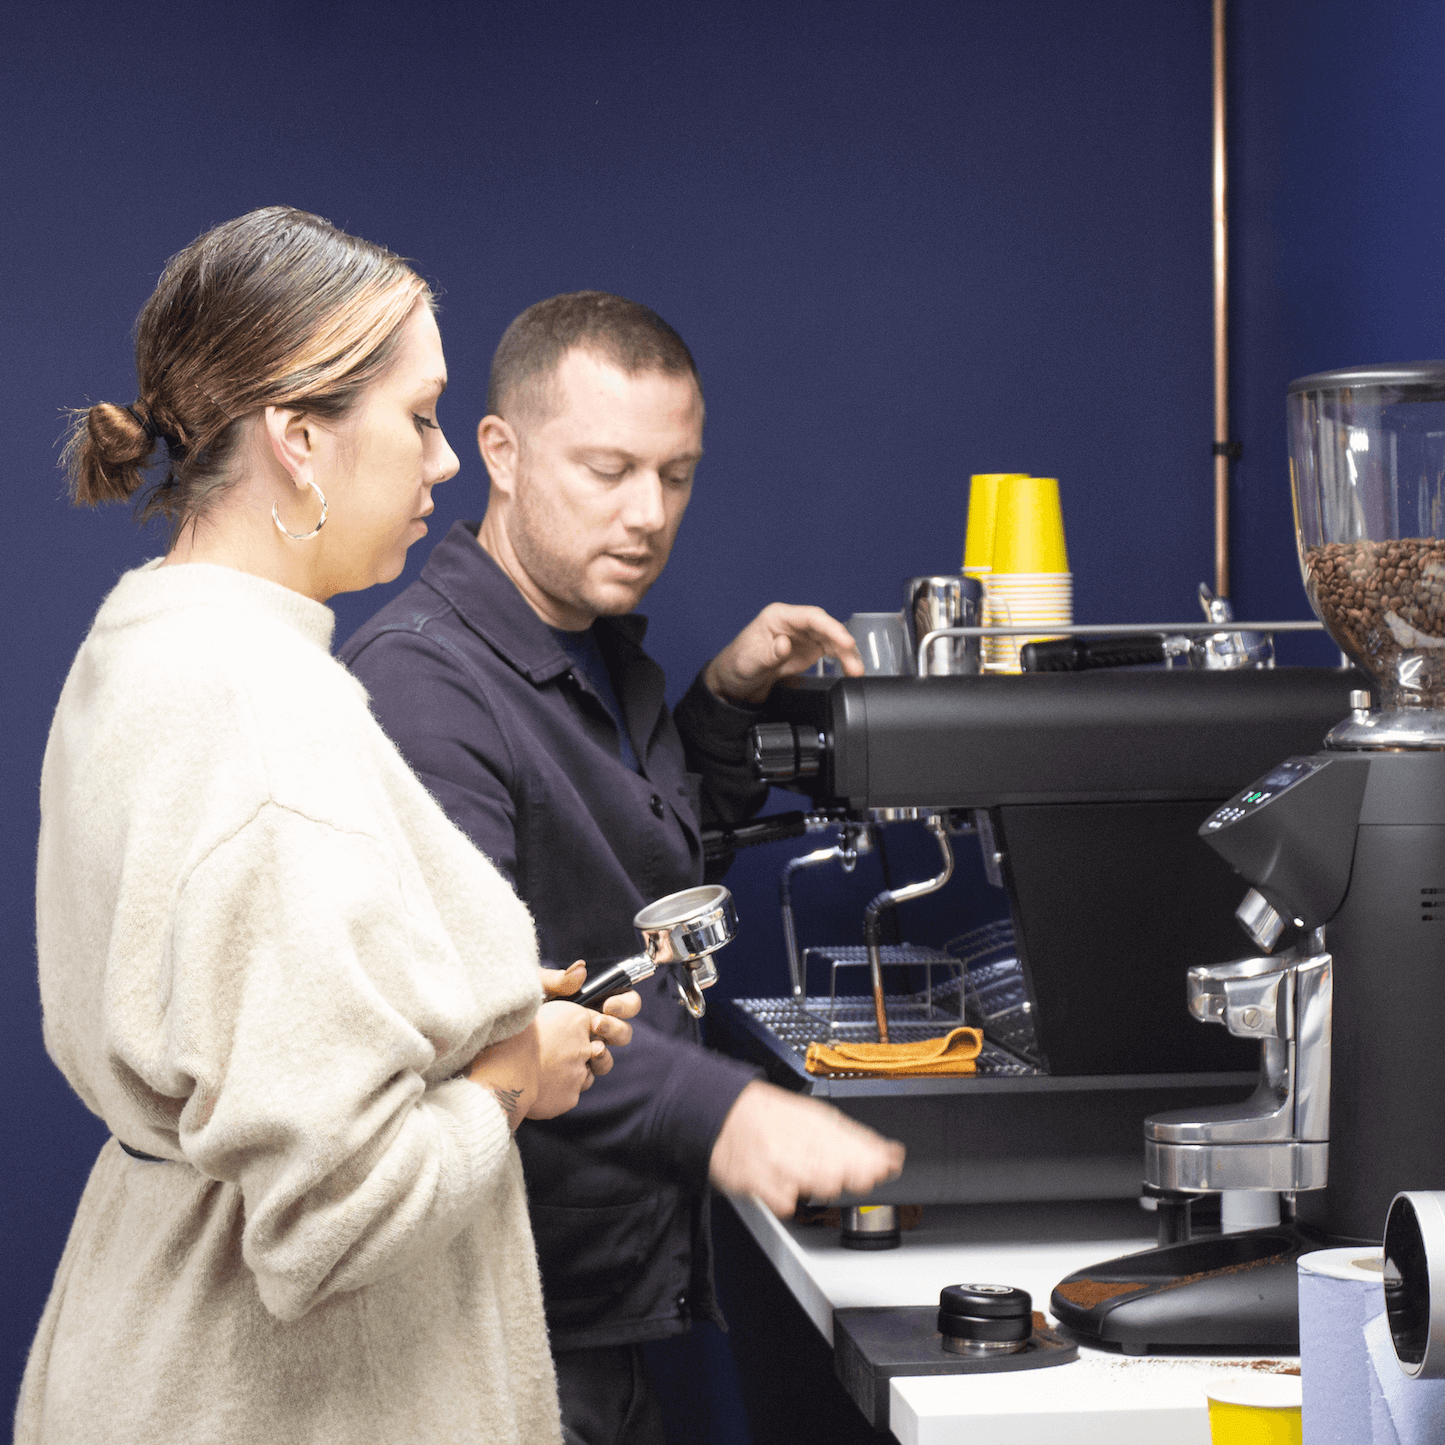 2 people working at espresso machine - Commercial Barista Basics course